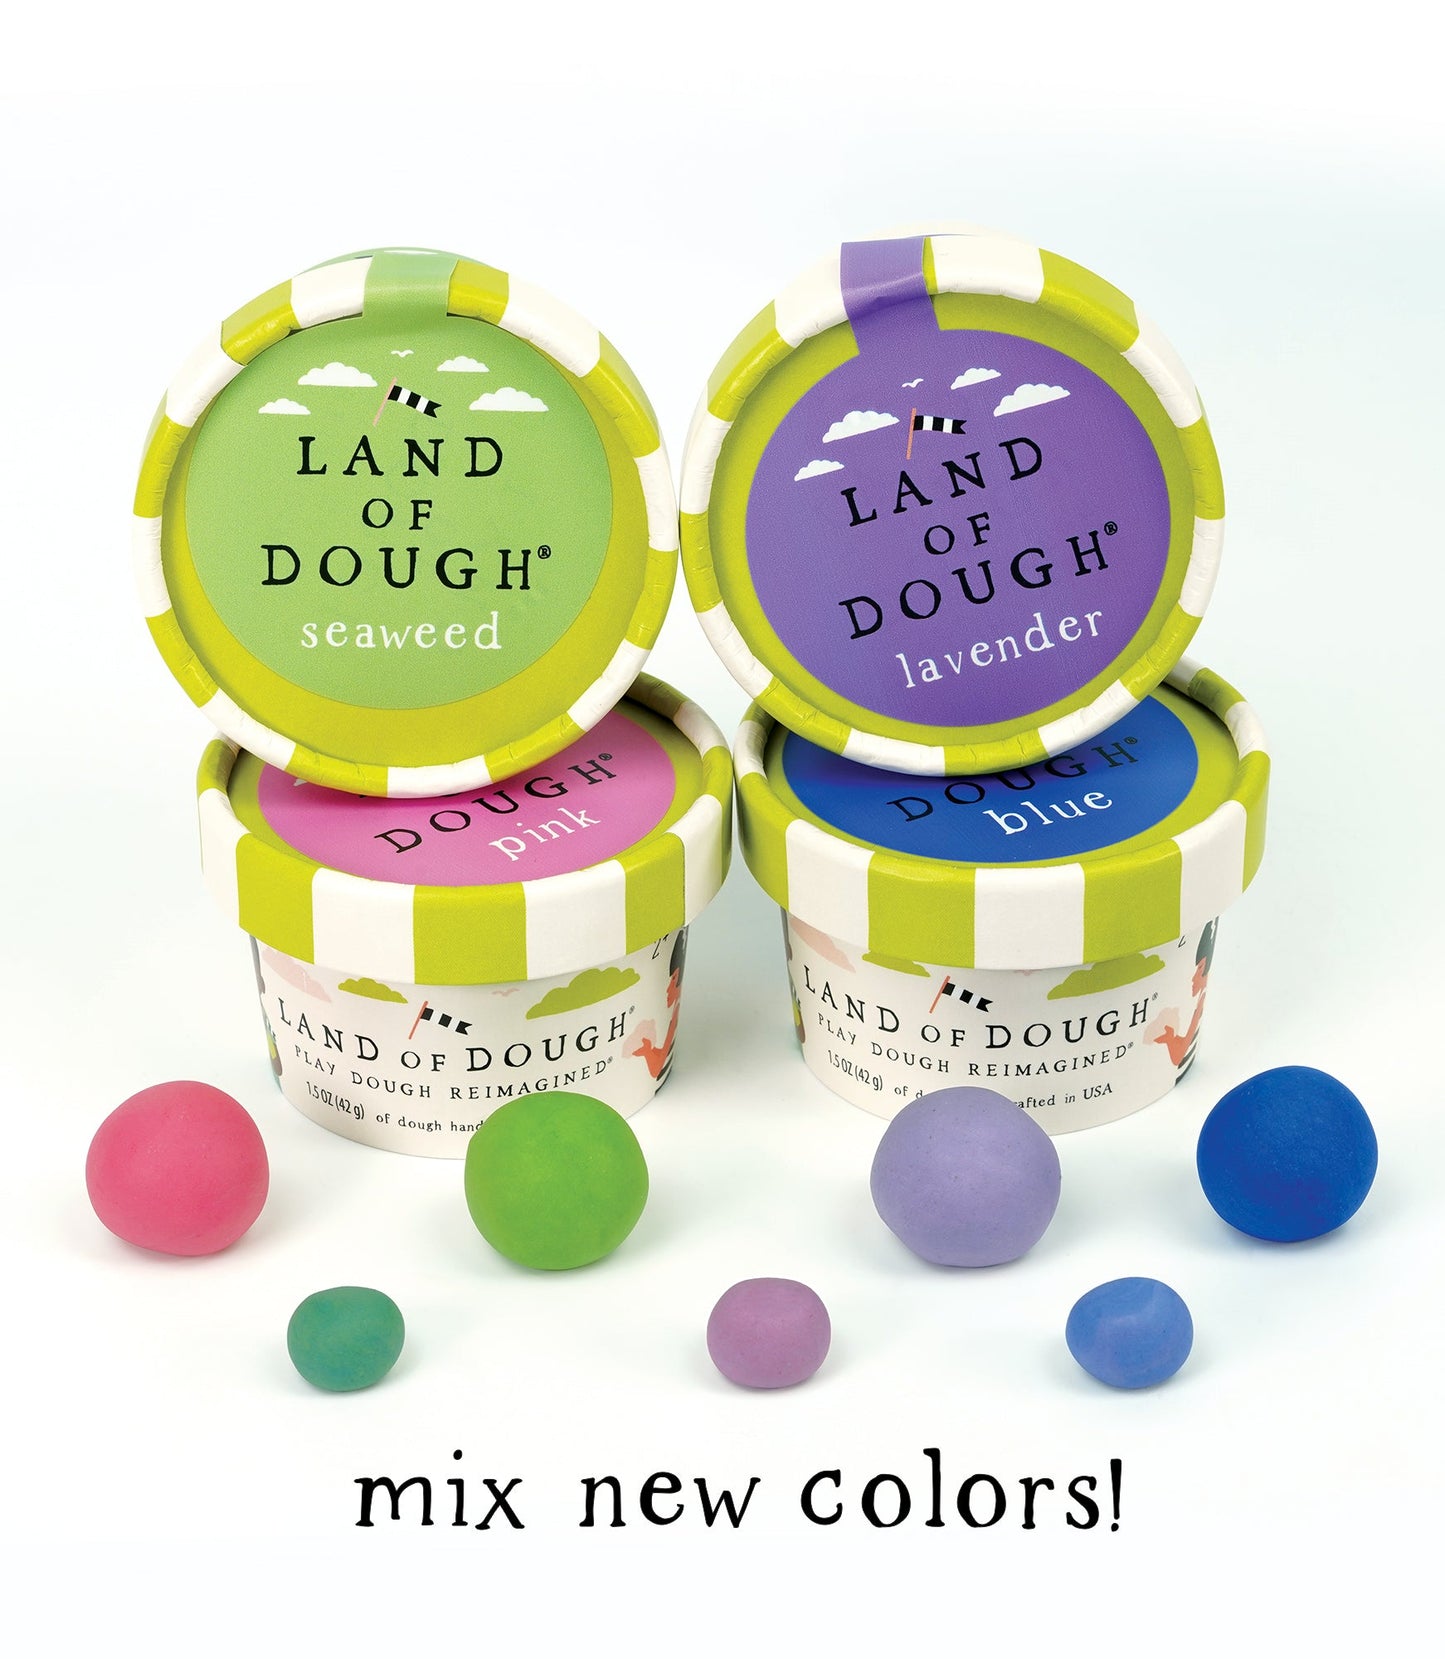 Follow the rainbow! Land of Dough® Rainbow pack includes 4 colors to mix, shape, and create. This brightly colored dough will make little creators shine.   Land of Dough® is made of all-natural dough and colors, compostable glitters, and calming essential oils in eco-friendly packaging.